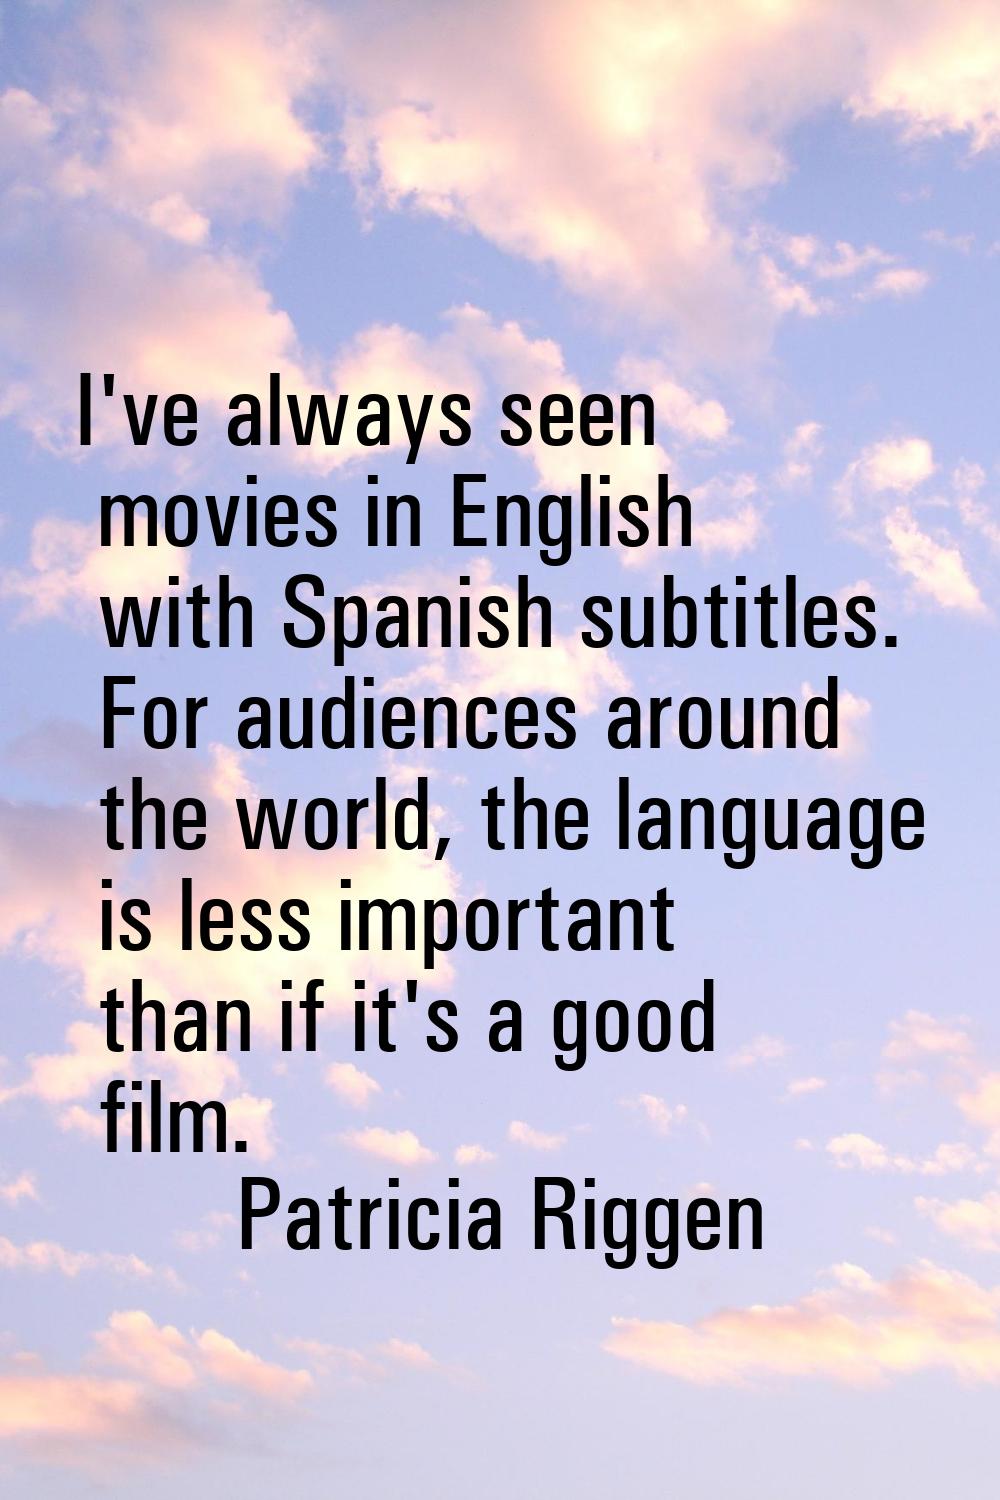 I've always seen movies in English with Spanish subtitles. For audiences around the world, the lang